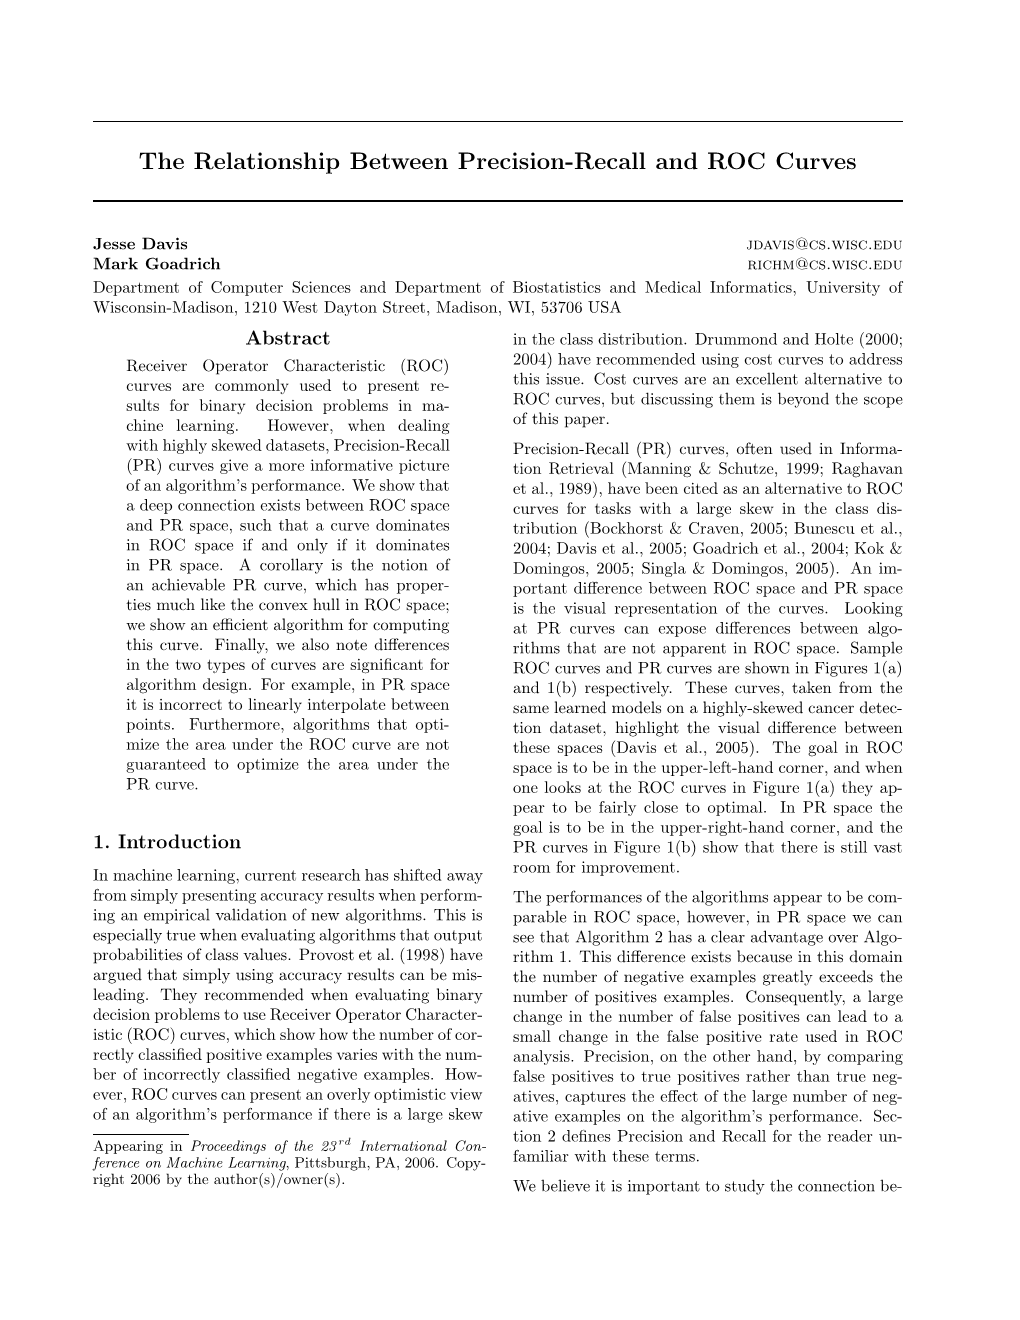 The Relationship Between Precision-Recall and ROC Curves